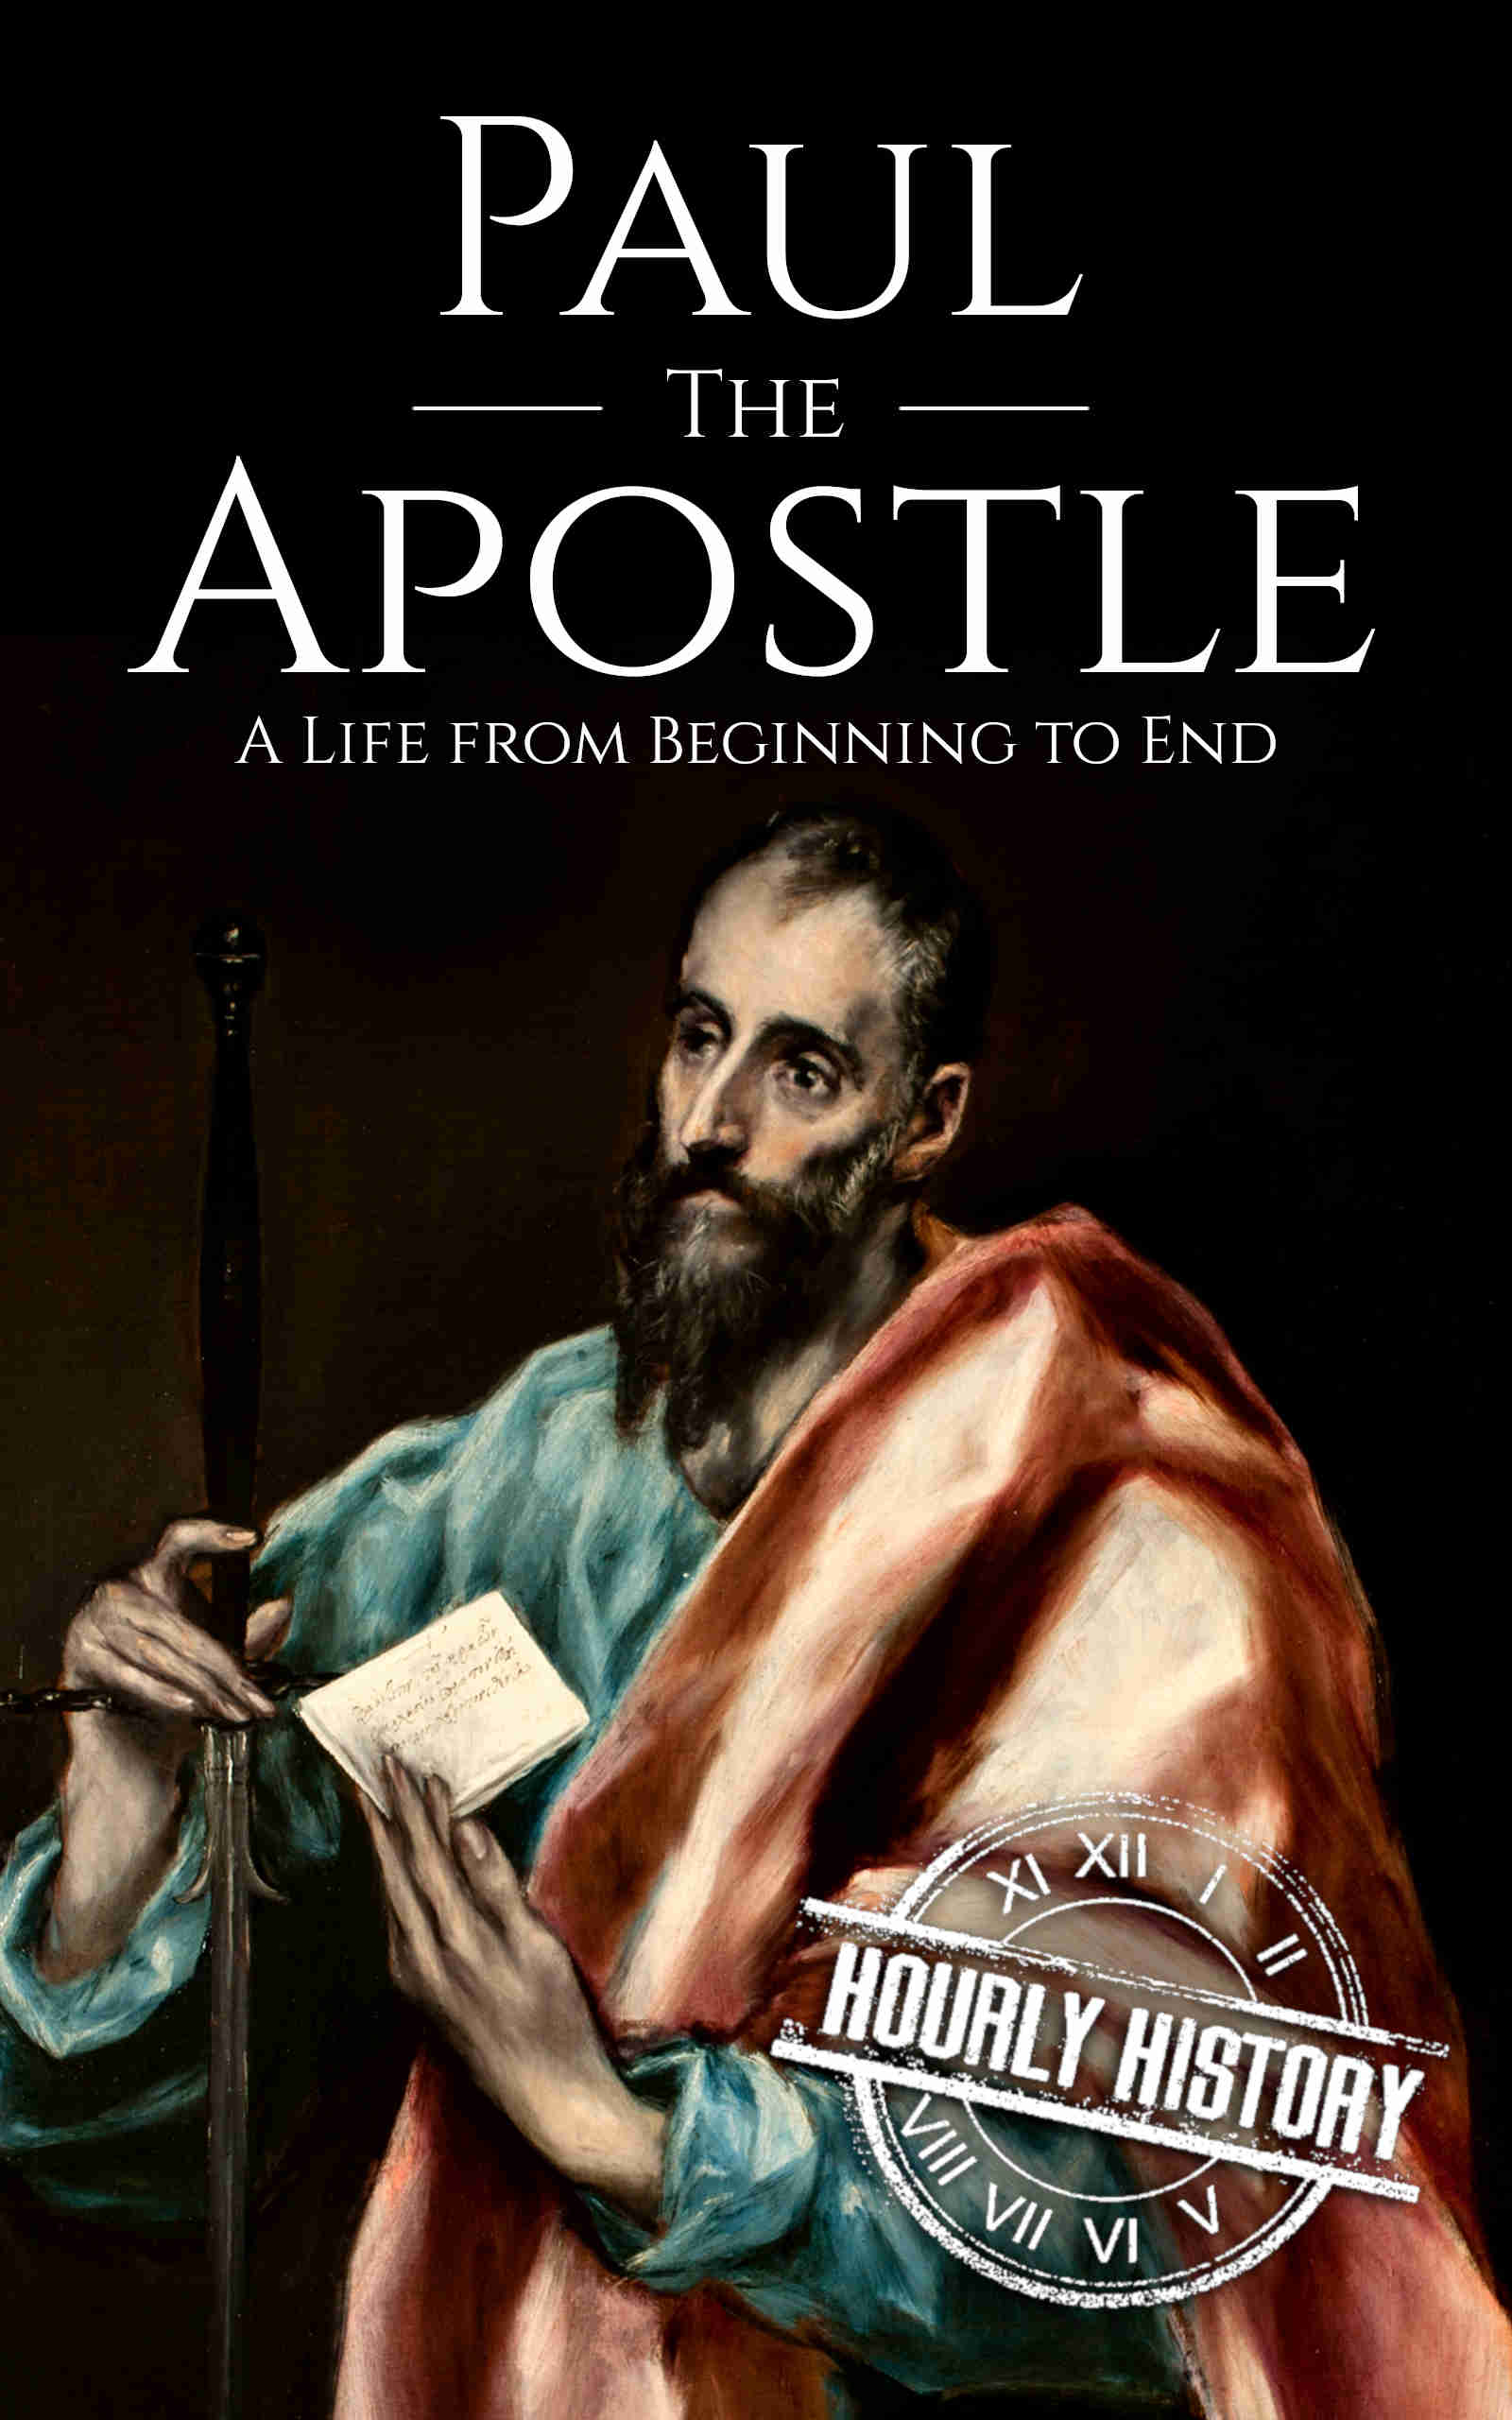 what are the best biography on the apostle paul